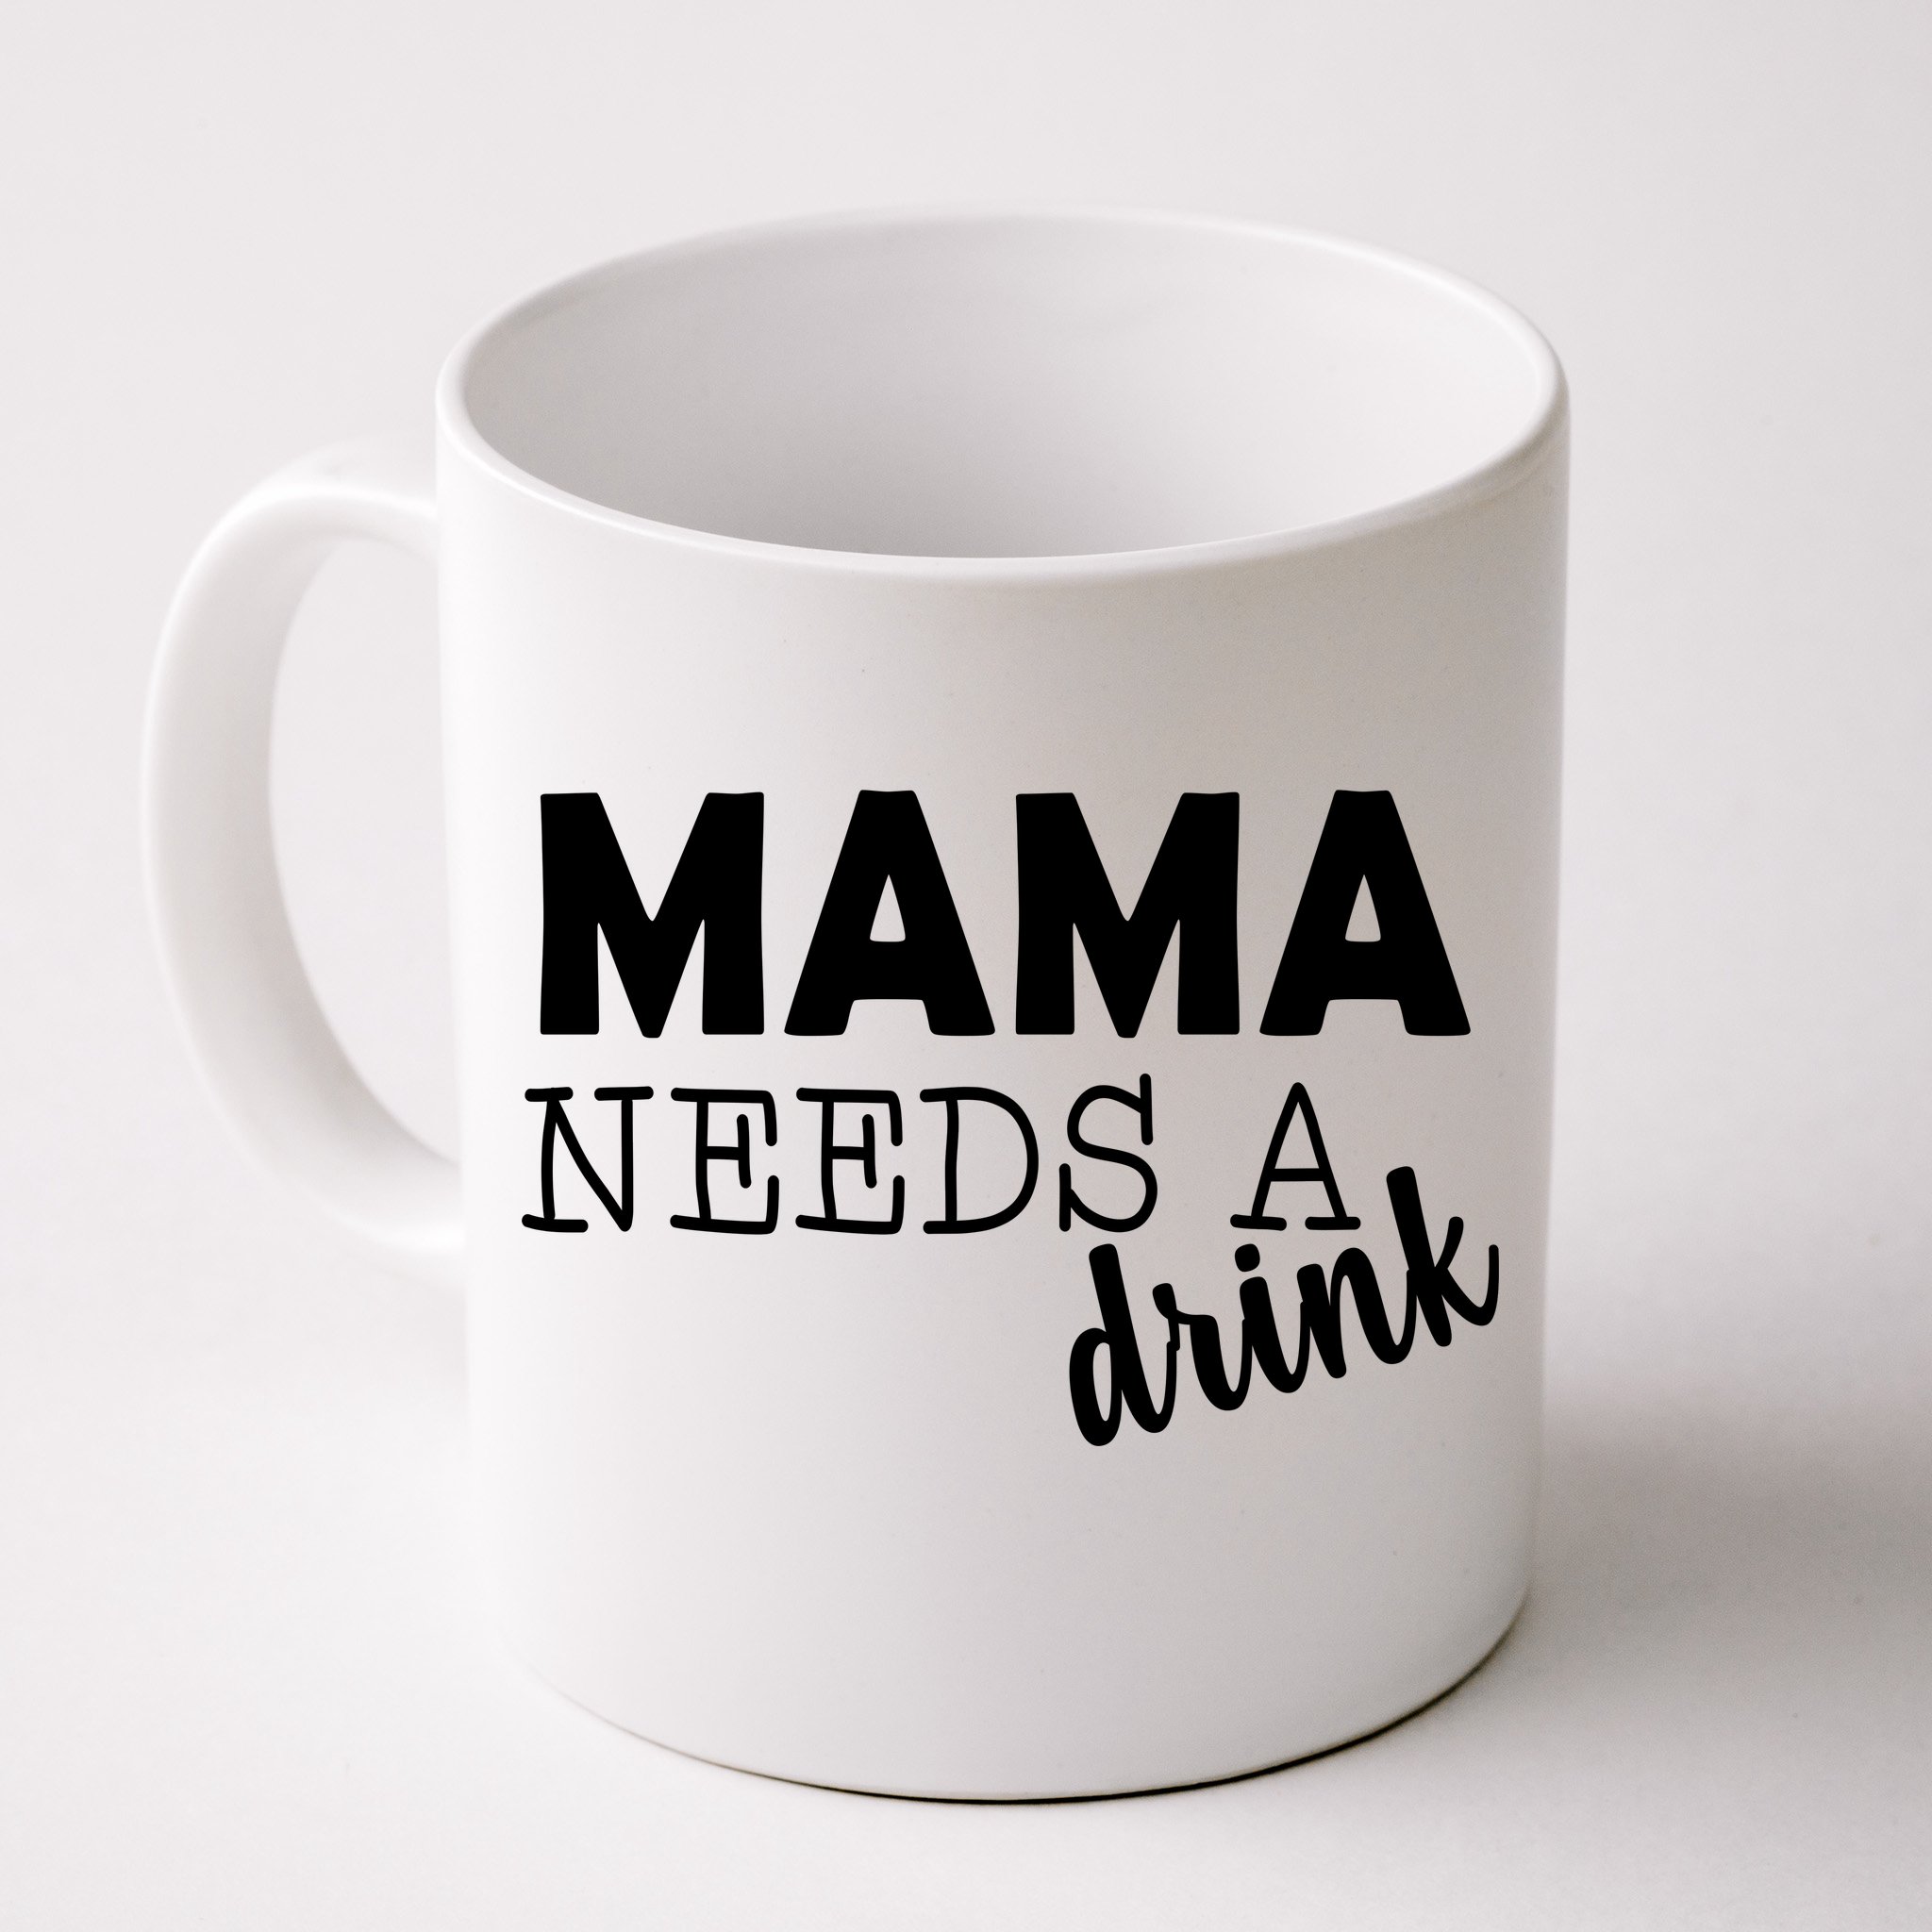 https://images3.teeshirtpalace.com/images/productImages/mama-needs-a-drink--white-cfm-front.jpg